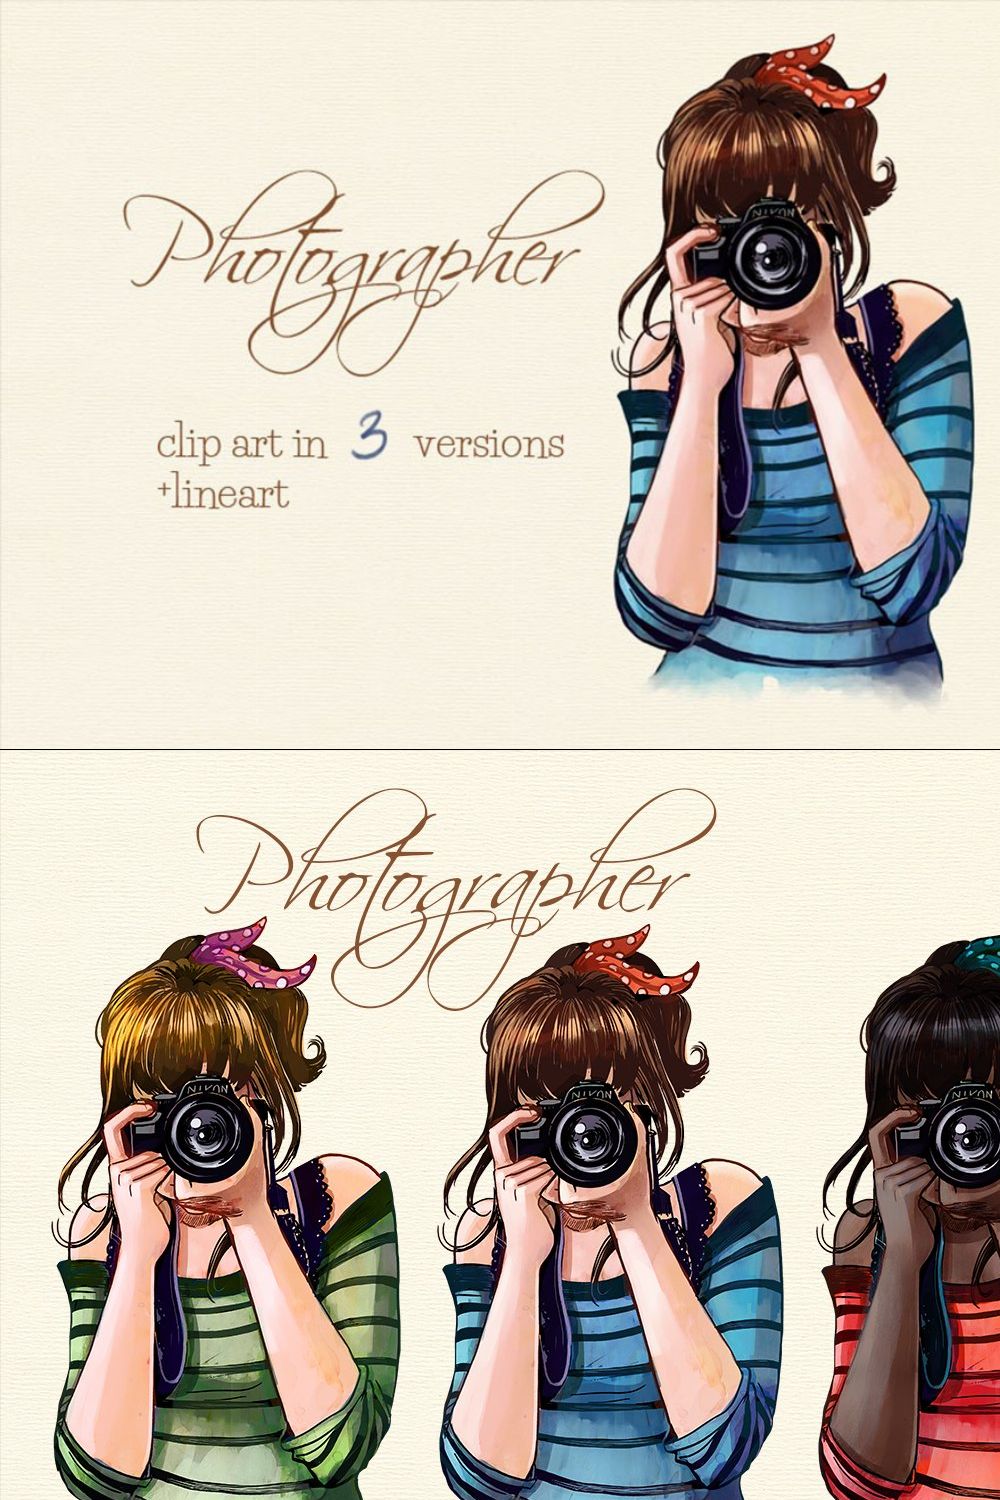 Woman with camera clip art, photo pinterest preview image.